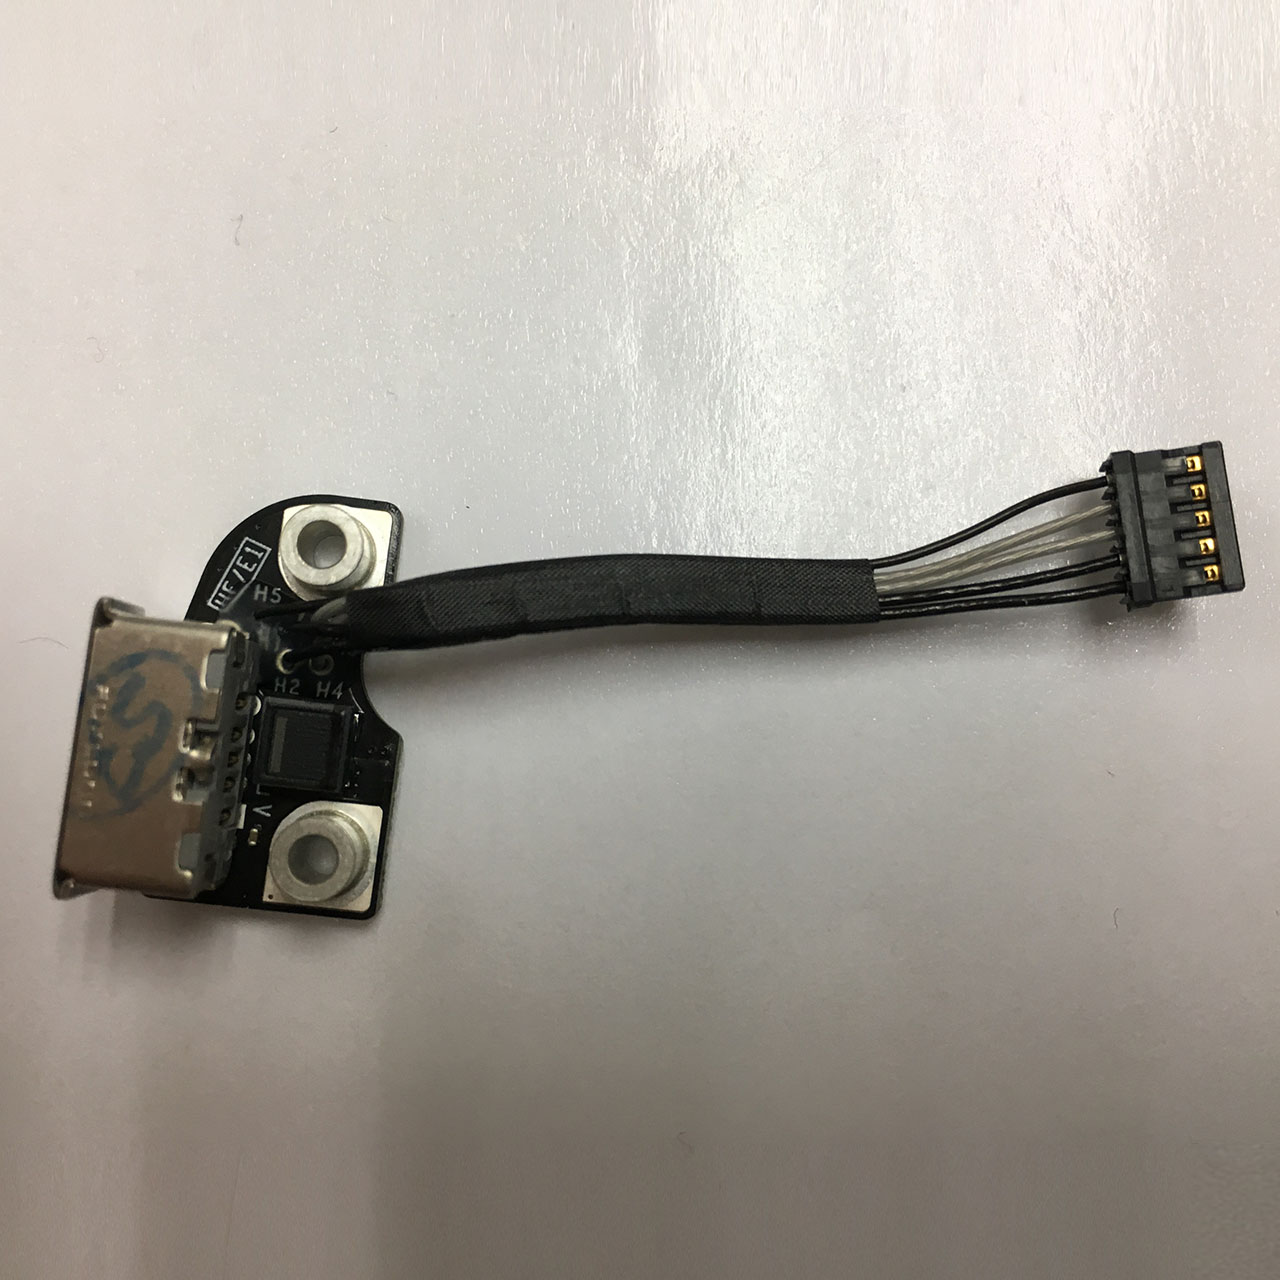 Magsafe DC Power Jack Board for Apple Macbook A1278 A1286 A1297 820-2565-A